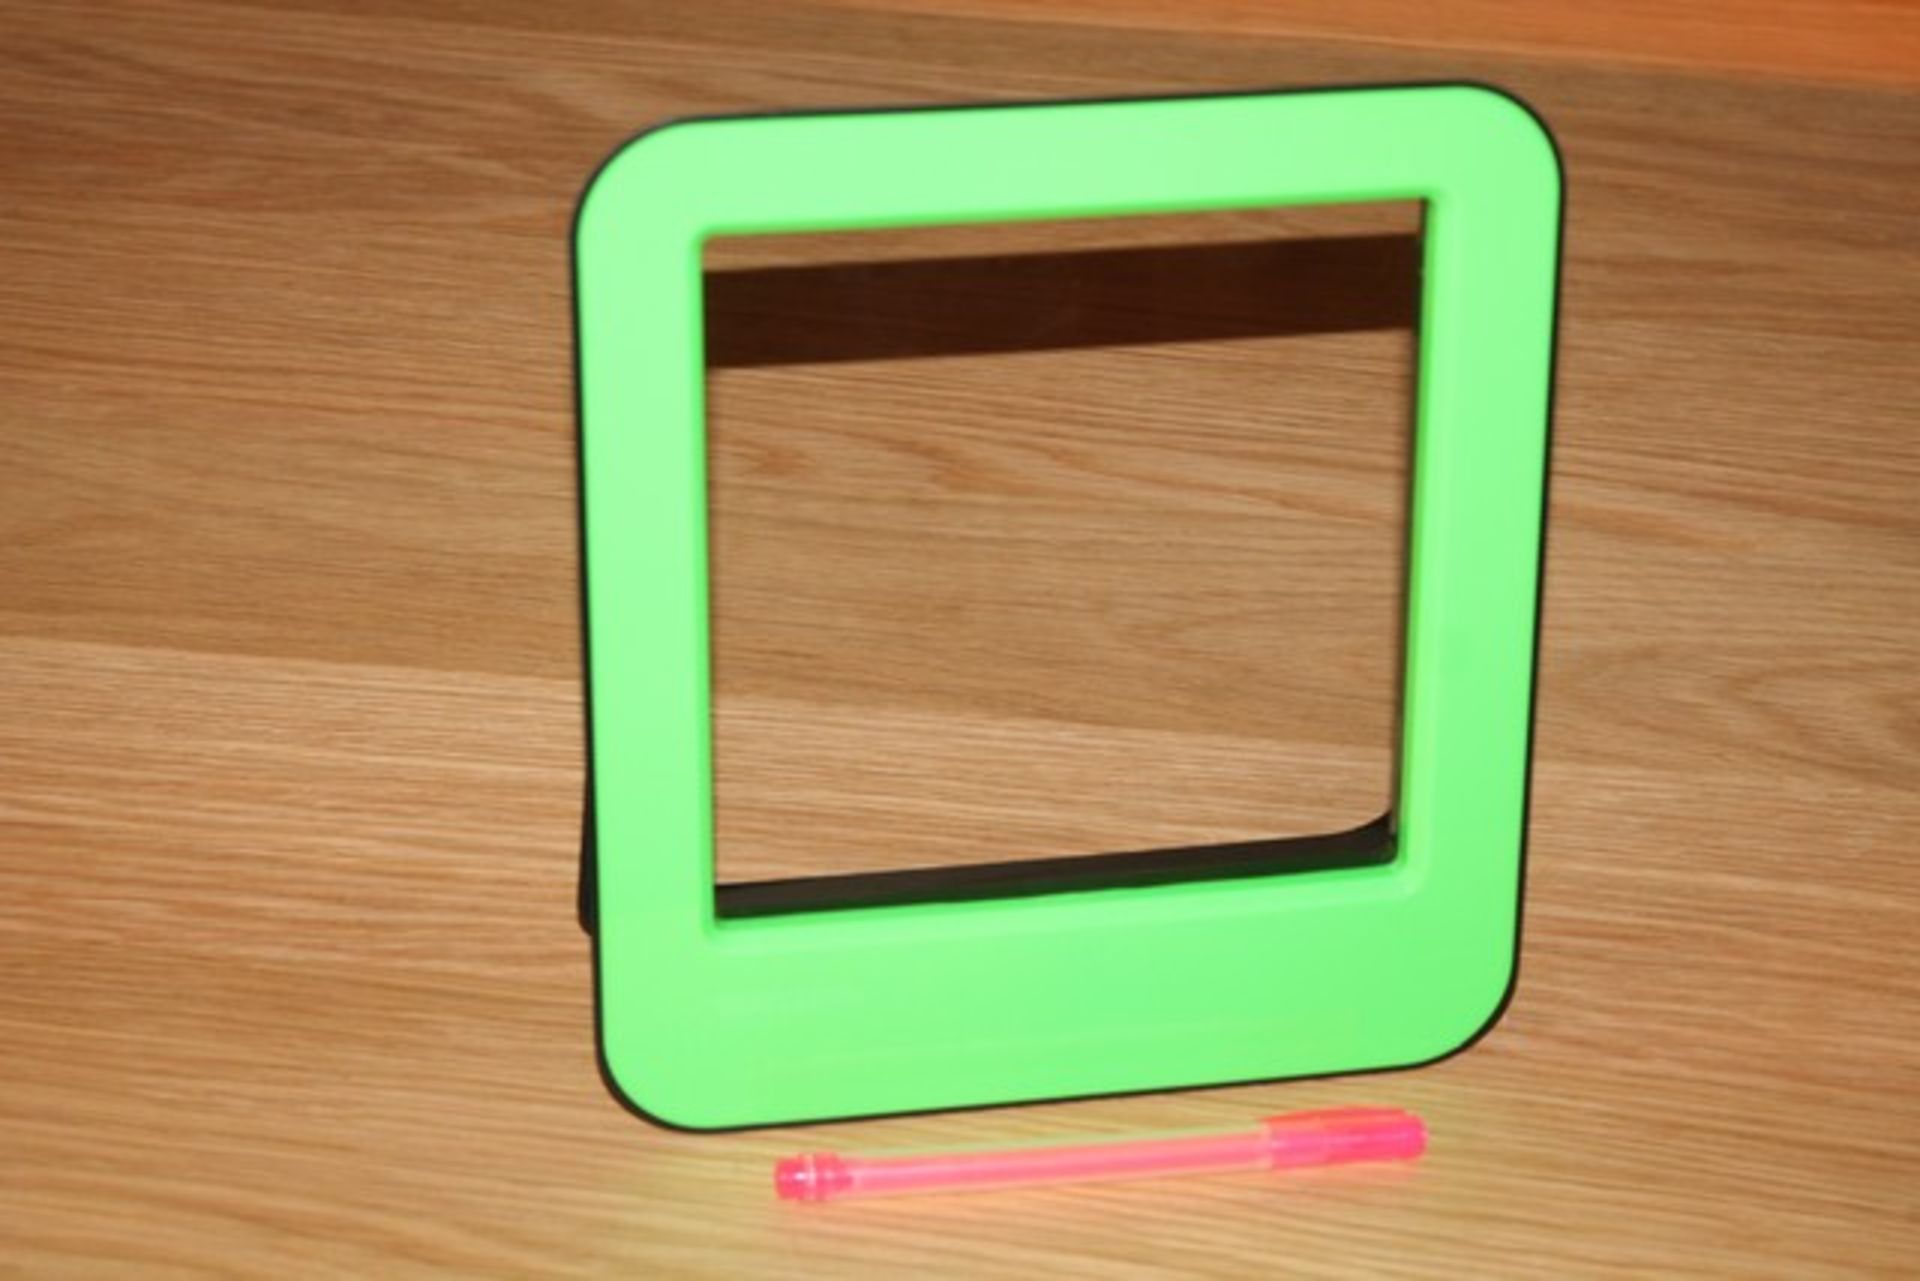 14 x BOXED BRAND NEW NEON WHITEBOARDS AND PEN SETS (26.1.15)  *PLEASE NOTE THAT THE BID PRICE IS